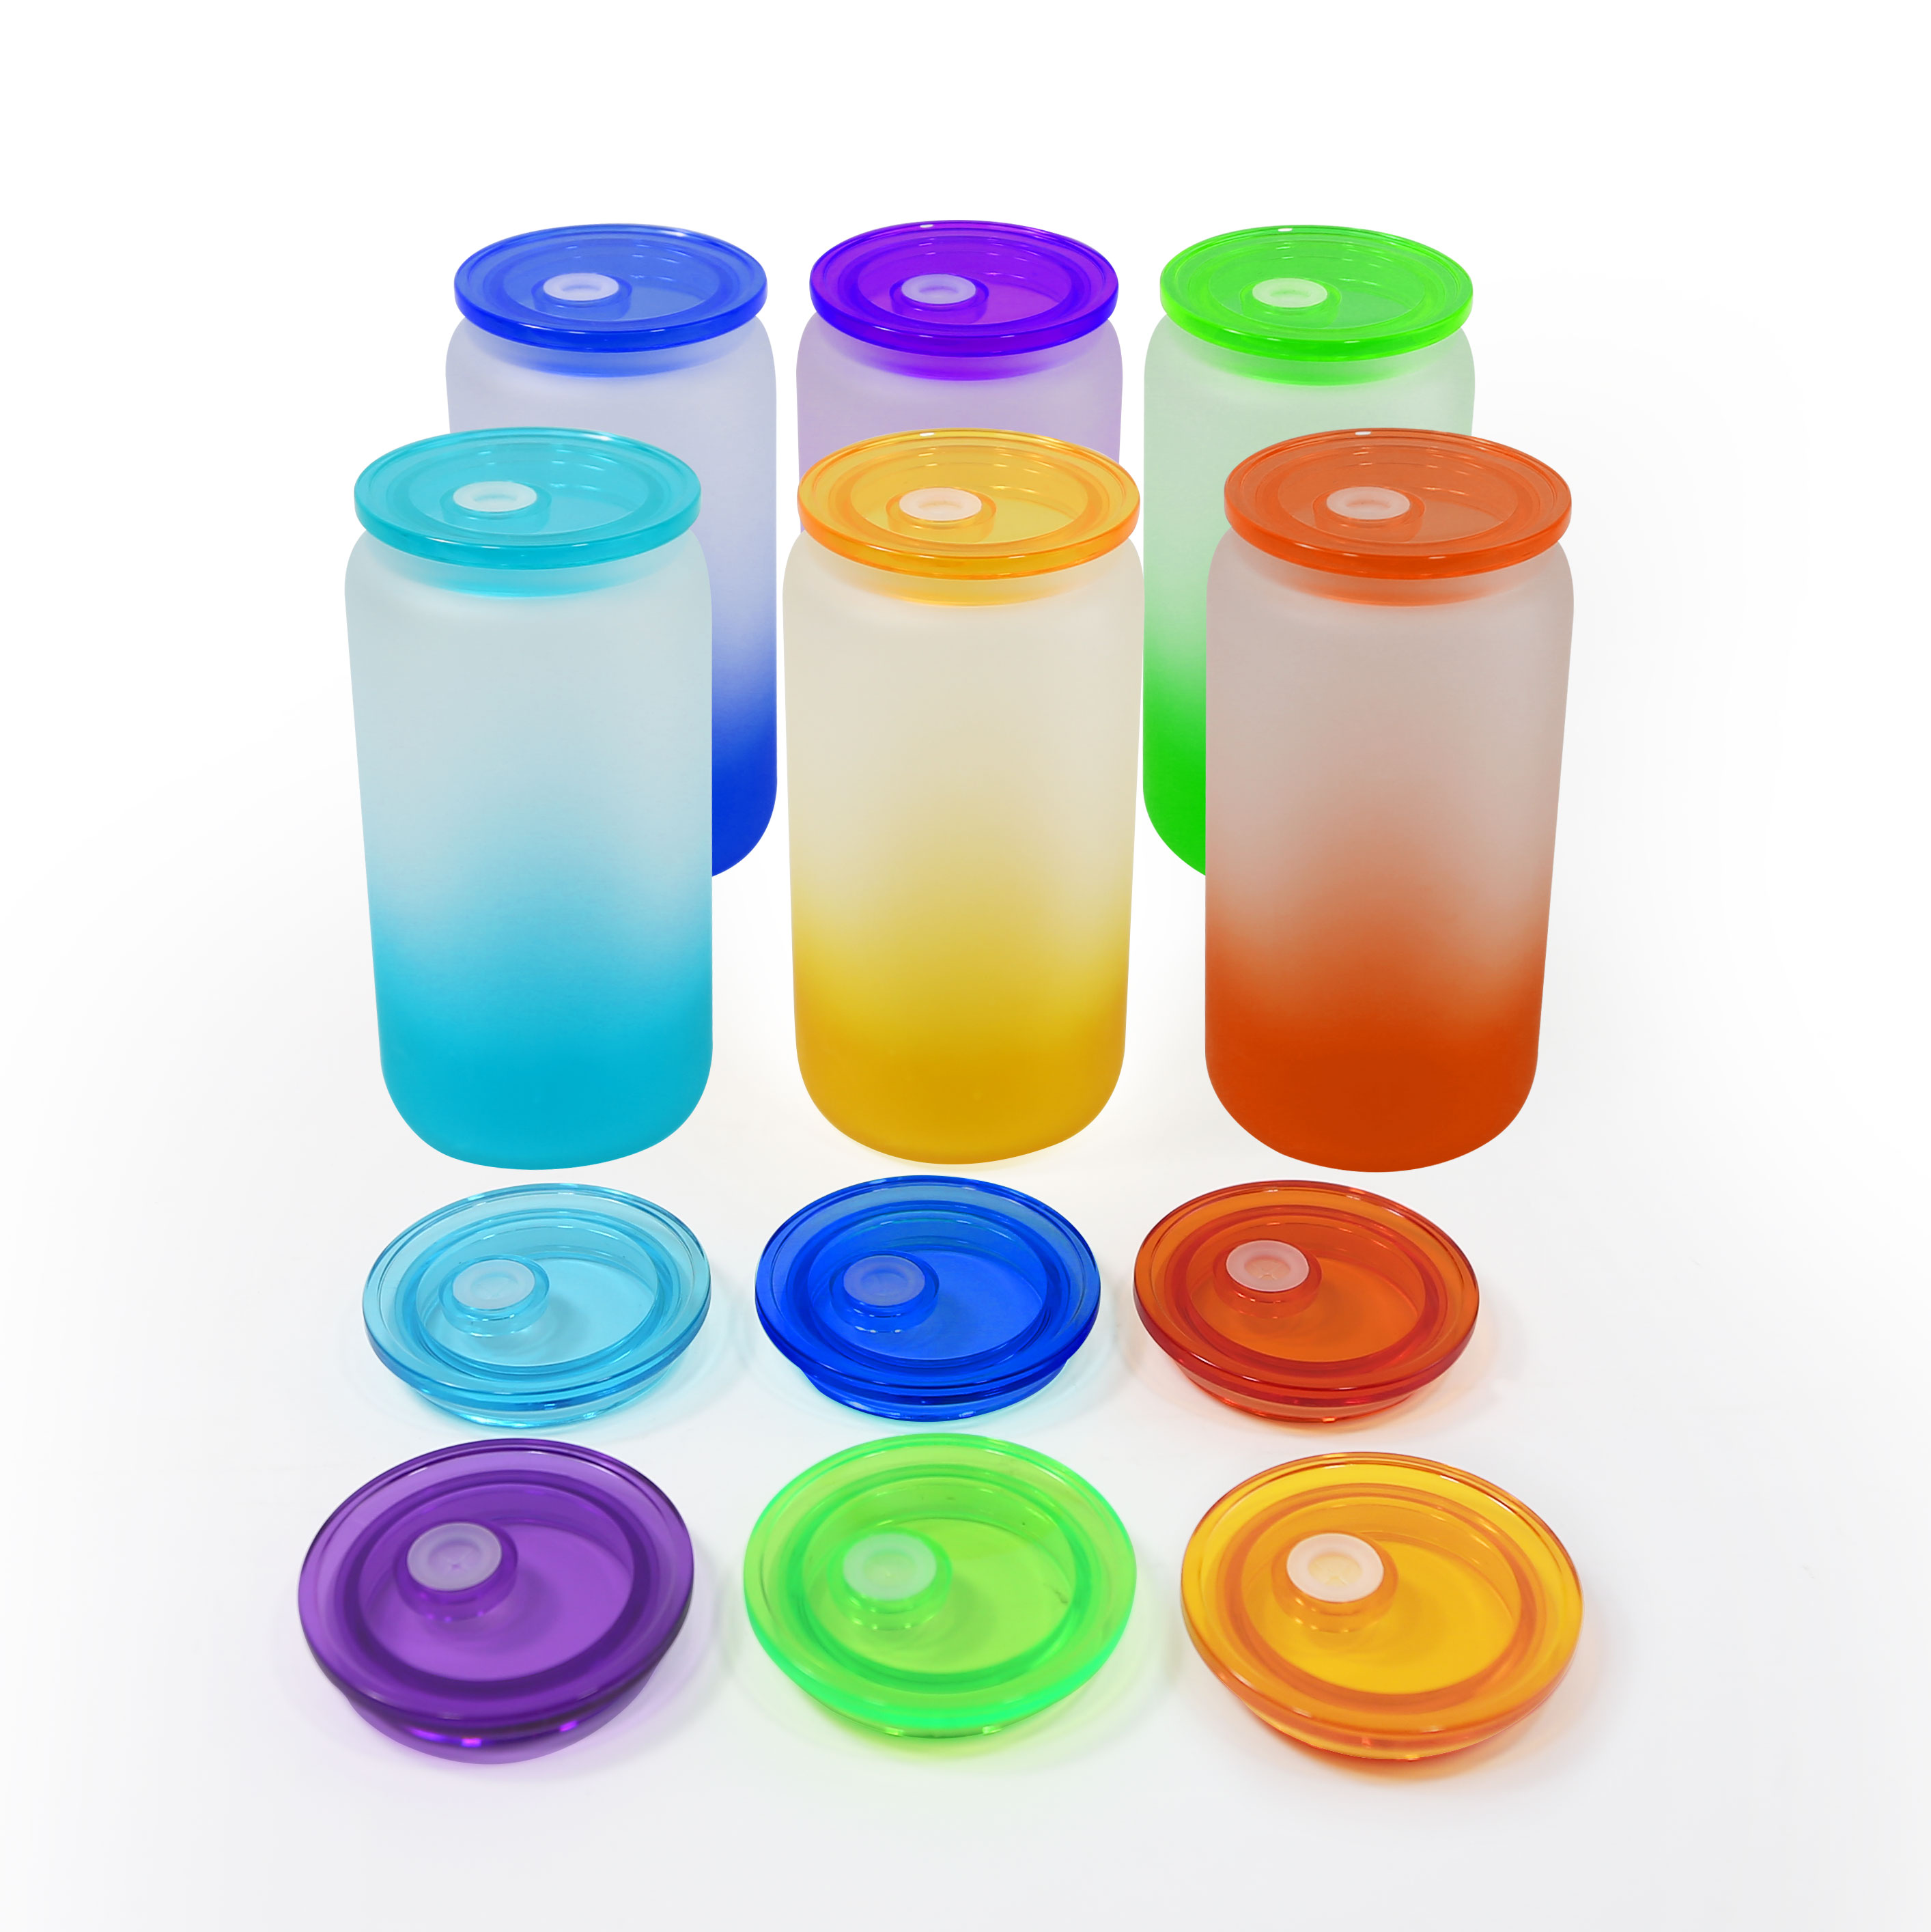 

Colored Replacement lids for 16oz glass tumbler Plastic sealing lid PP material Spill Proof Splash Resistant cover for straight cup